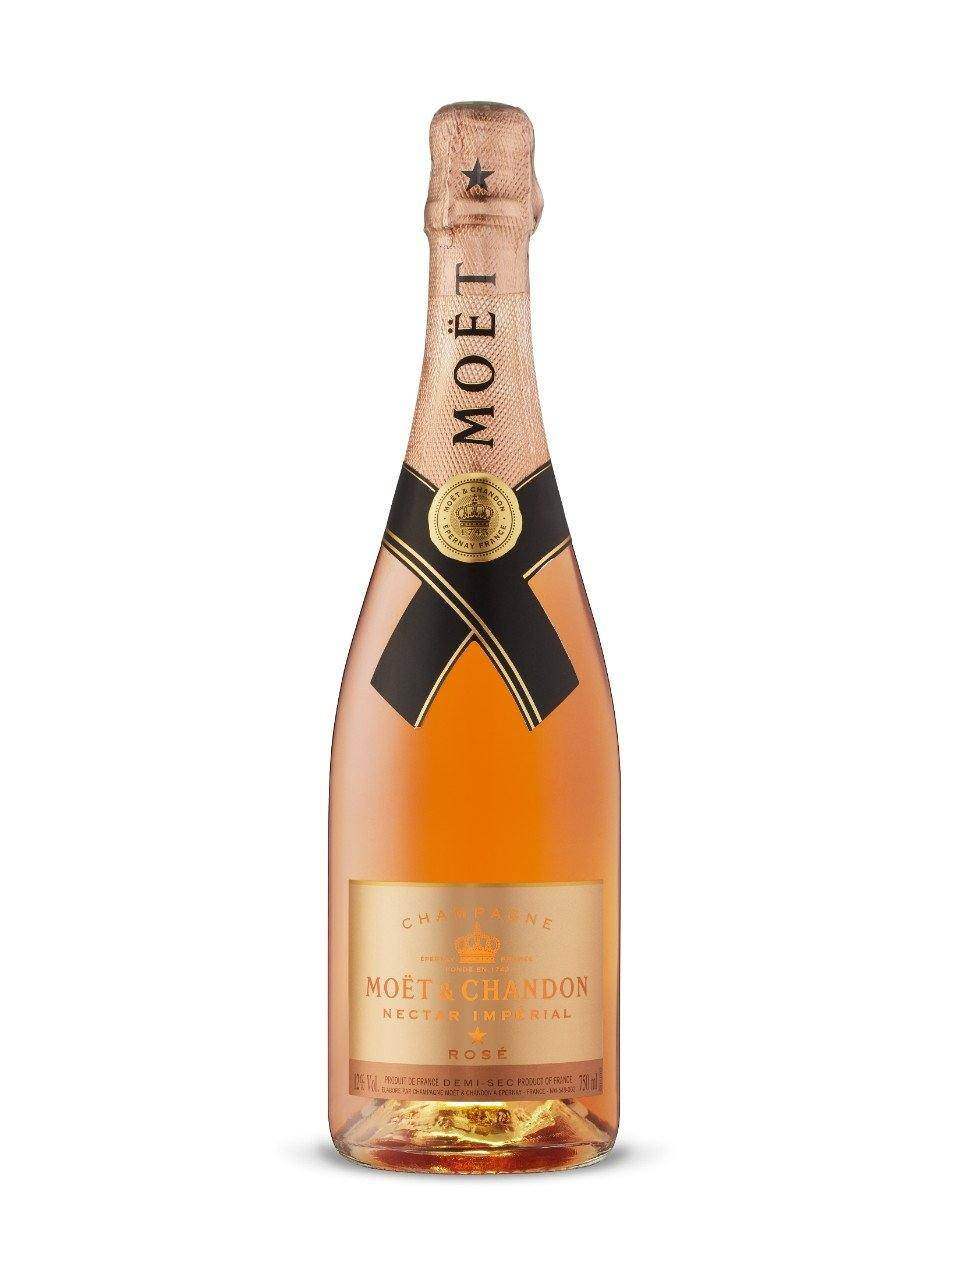 Moet Chandon Nectar Imperial Rose | Exquisite Wine & Alcohol Gift Delivery Toronto Canada | Vyno